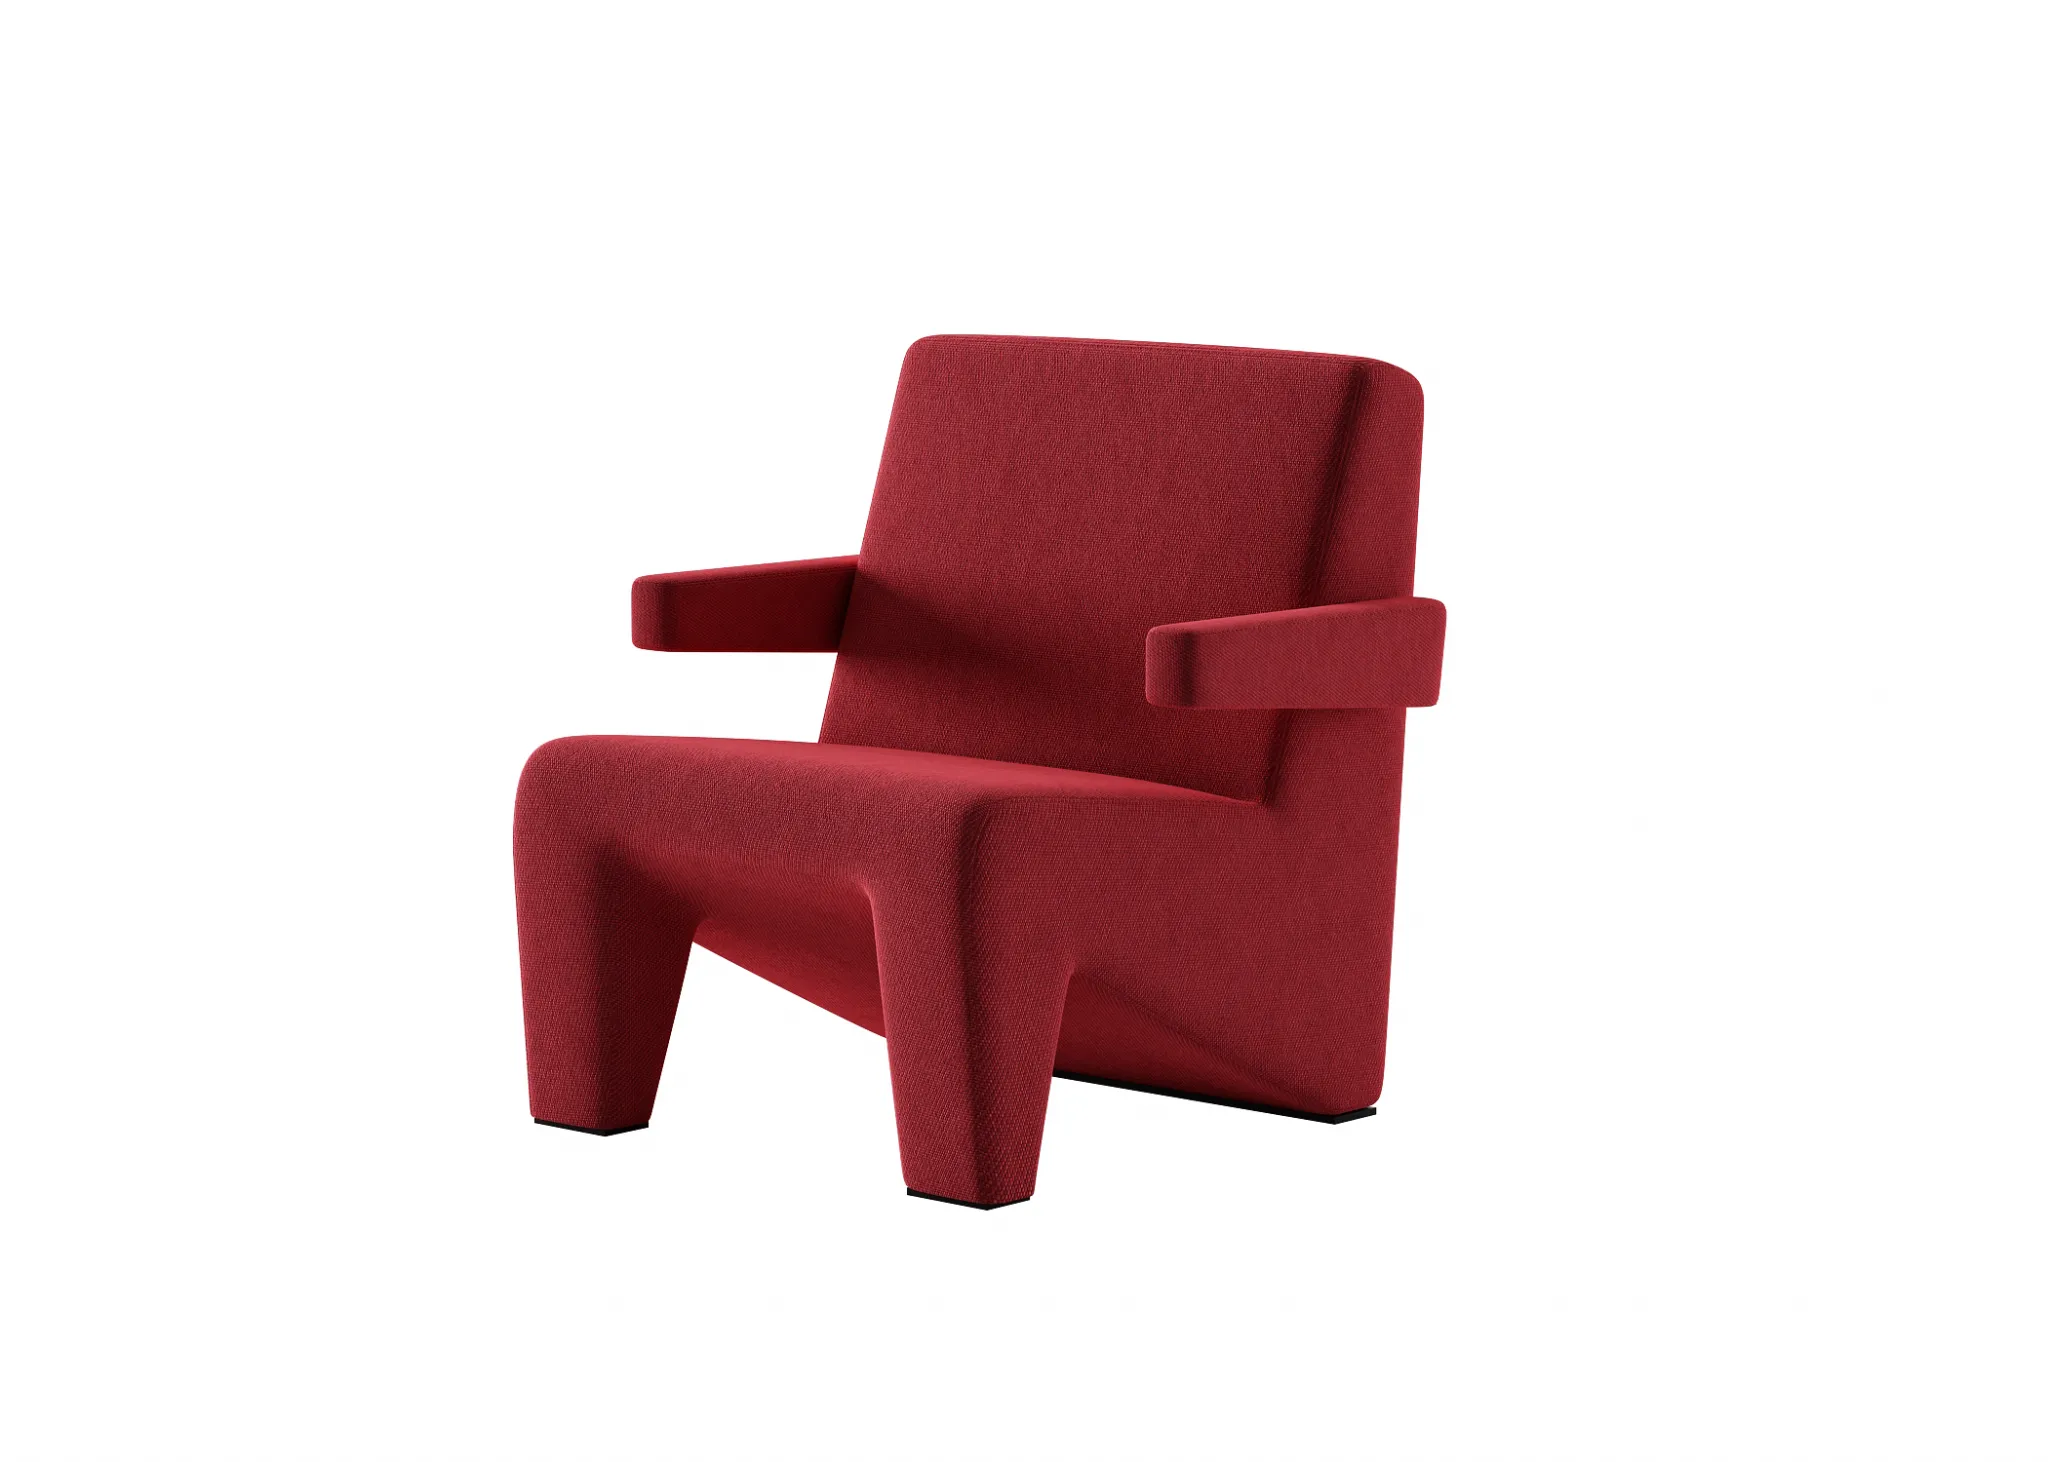 FURNITURE 3D MODELS – CHAIRS – 0389